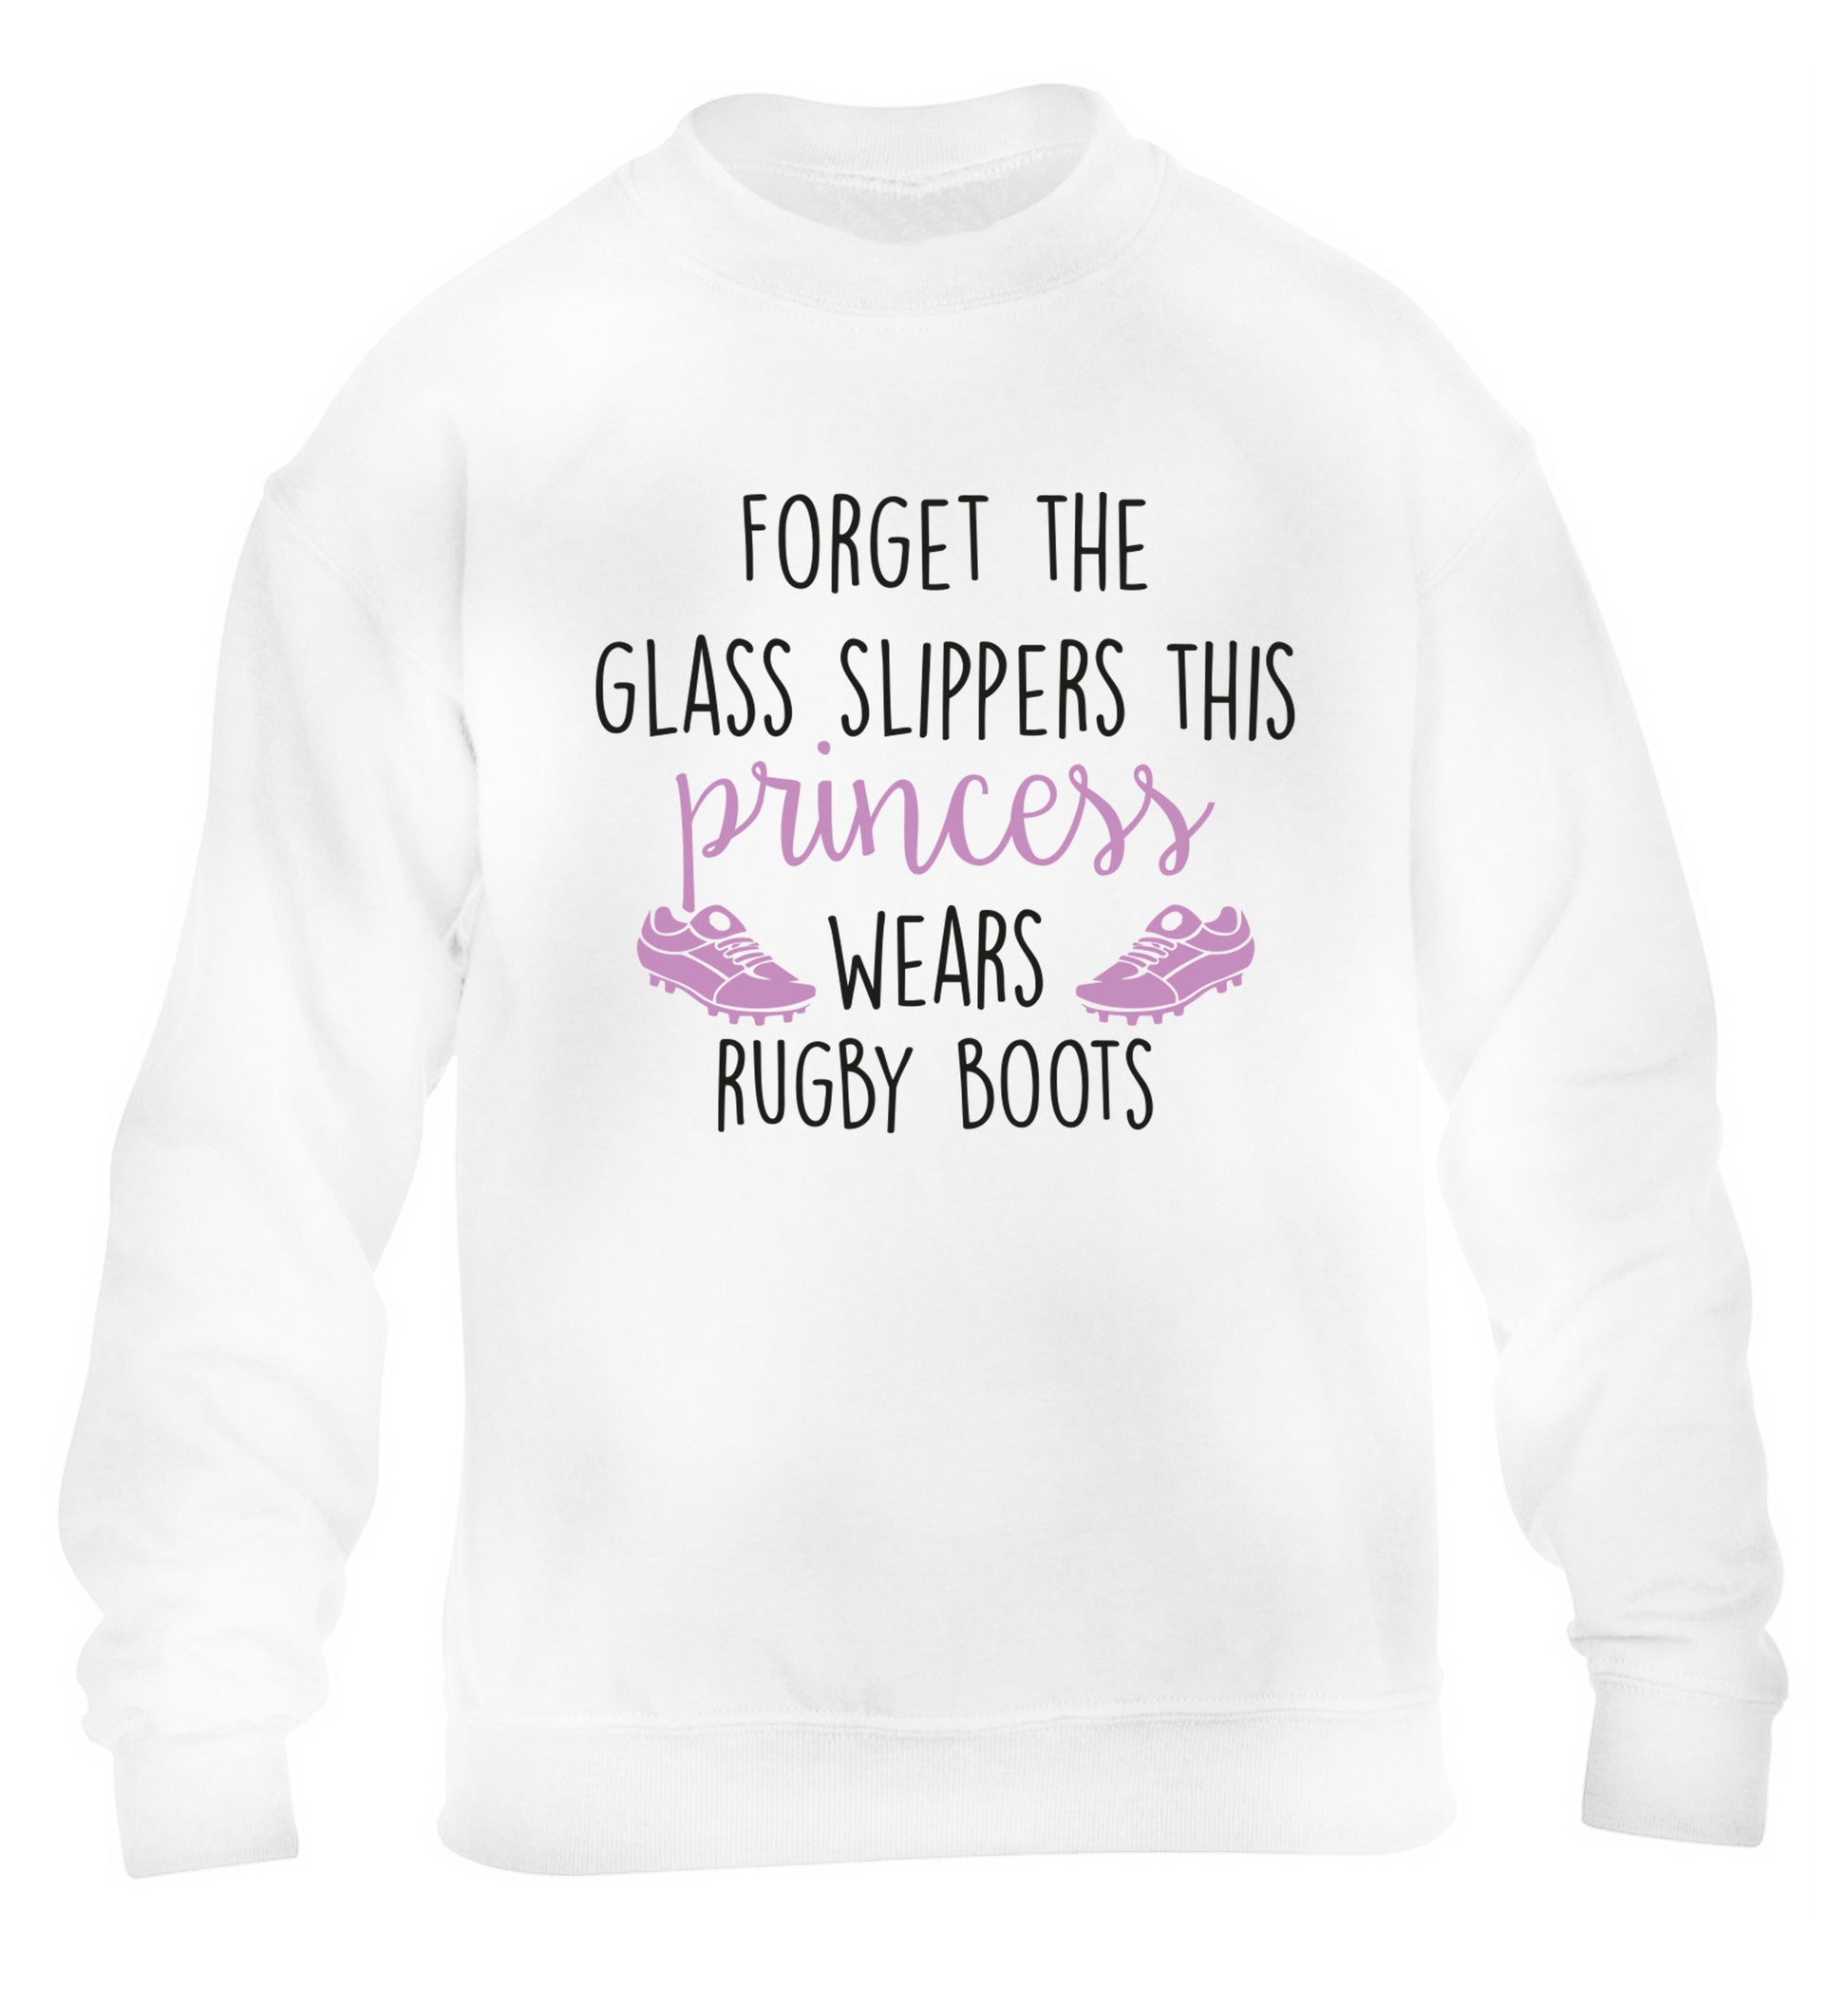 Forget the glass slippers this princess wears rugby boots children's white sweater 12-14 Years